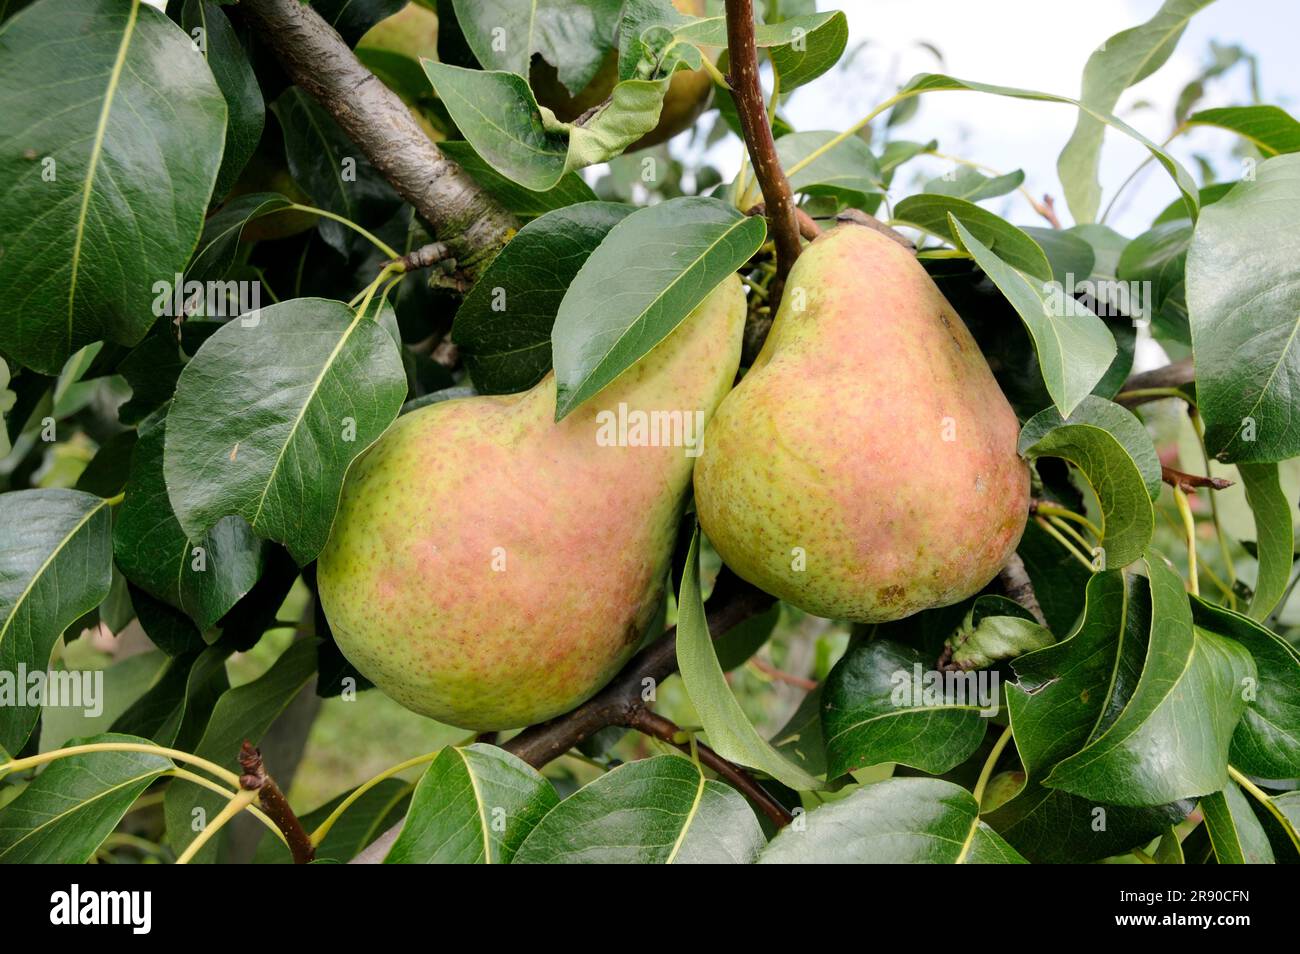 Pears Nitra on the tree (Pyrus communis) Stock Photo